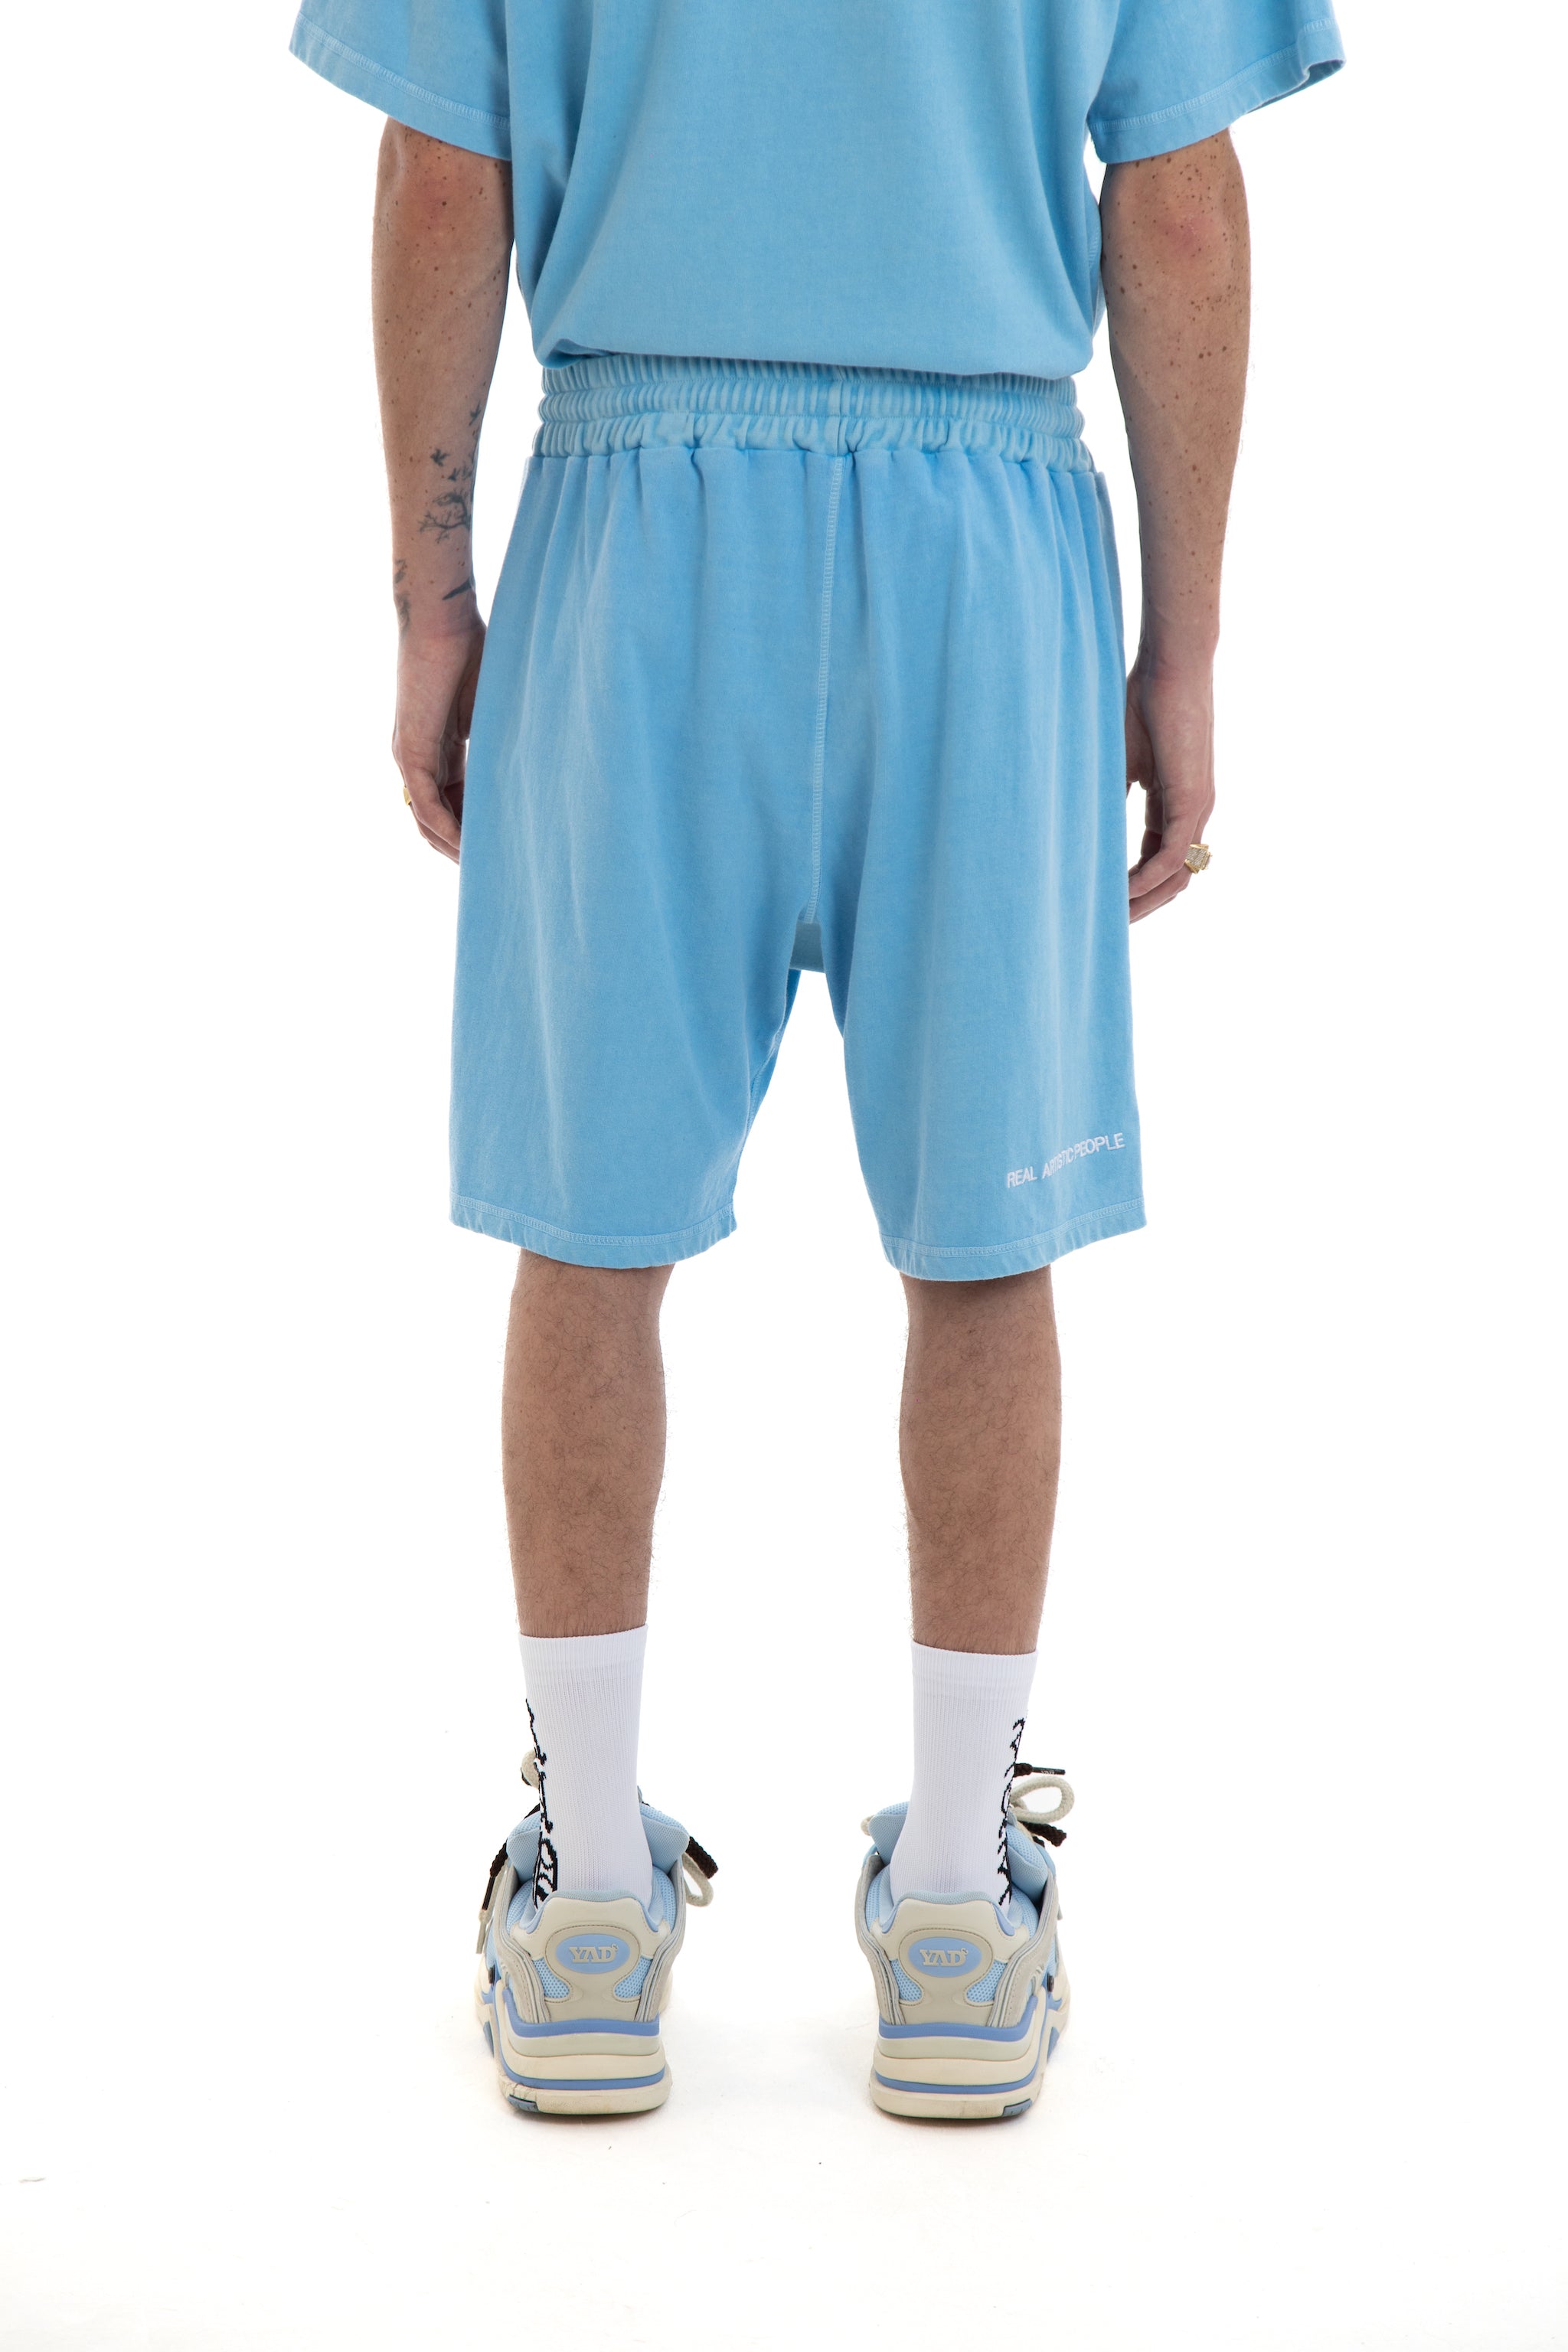 Heir Oversized Shorts Sky Blue - RealArtisticPeople